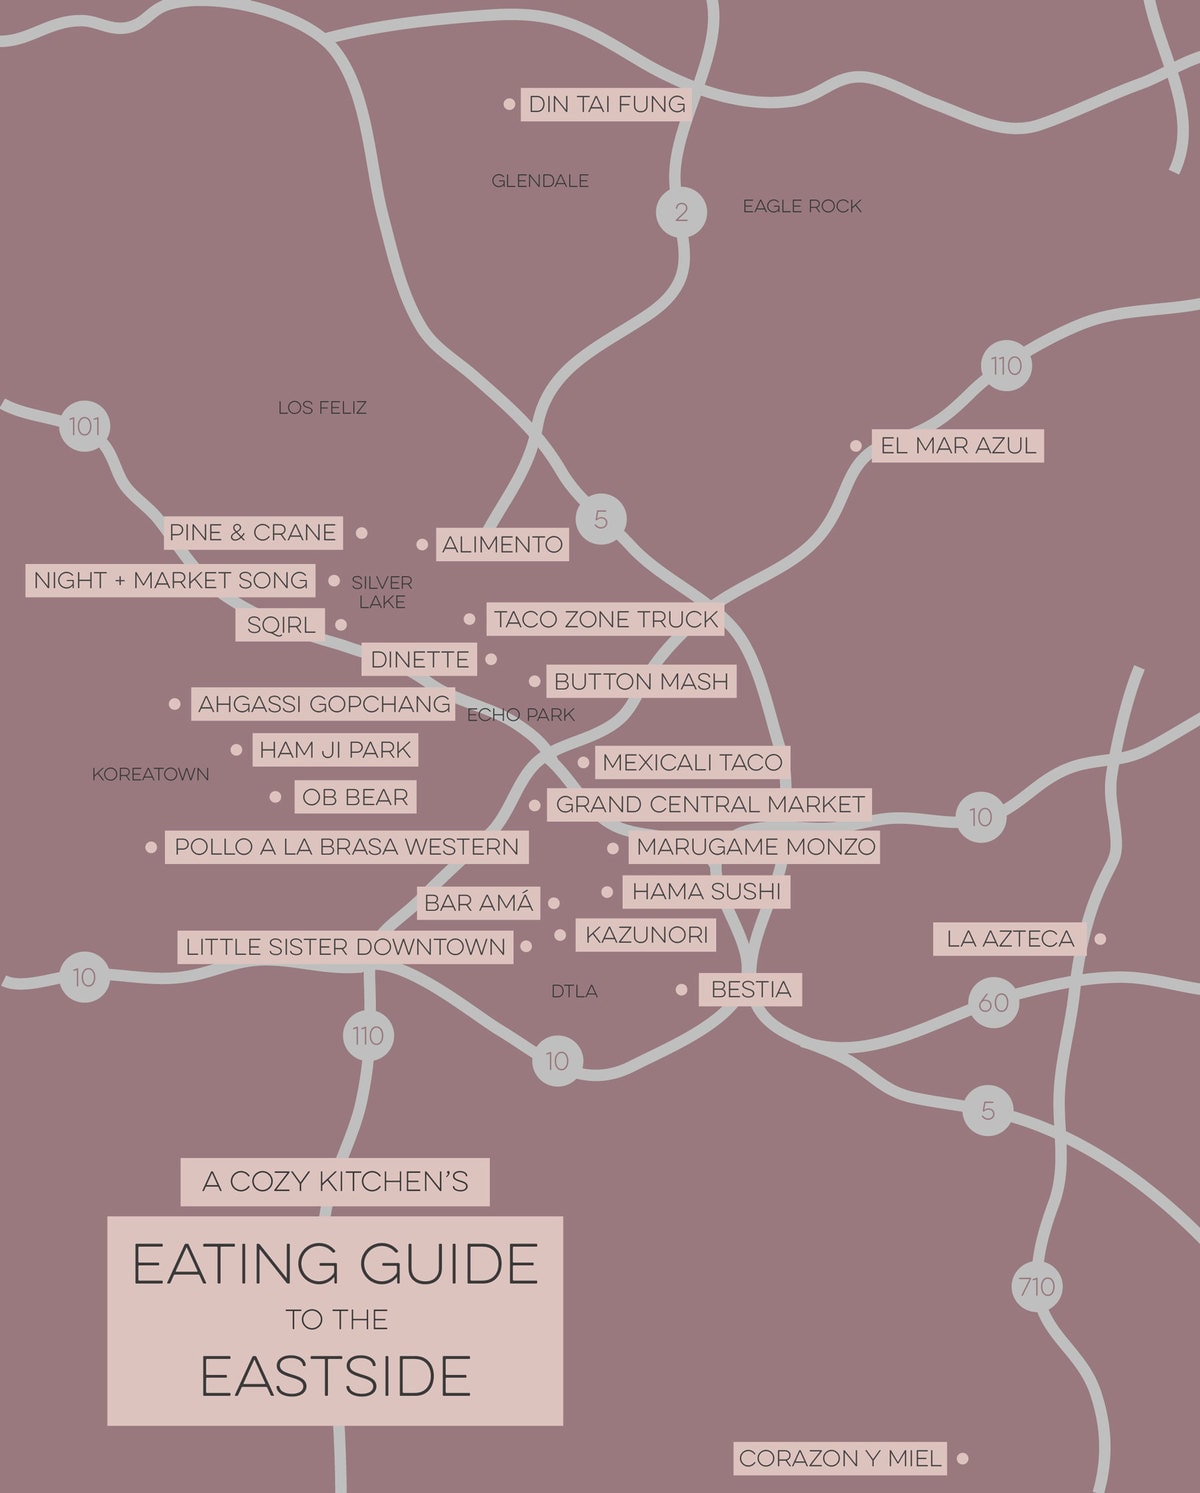 A Cozy Kitchen's Eastside Food Guide